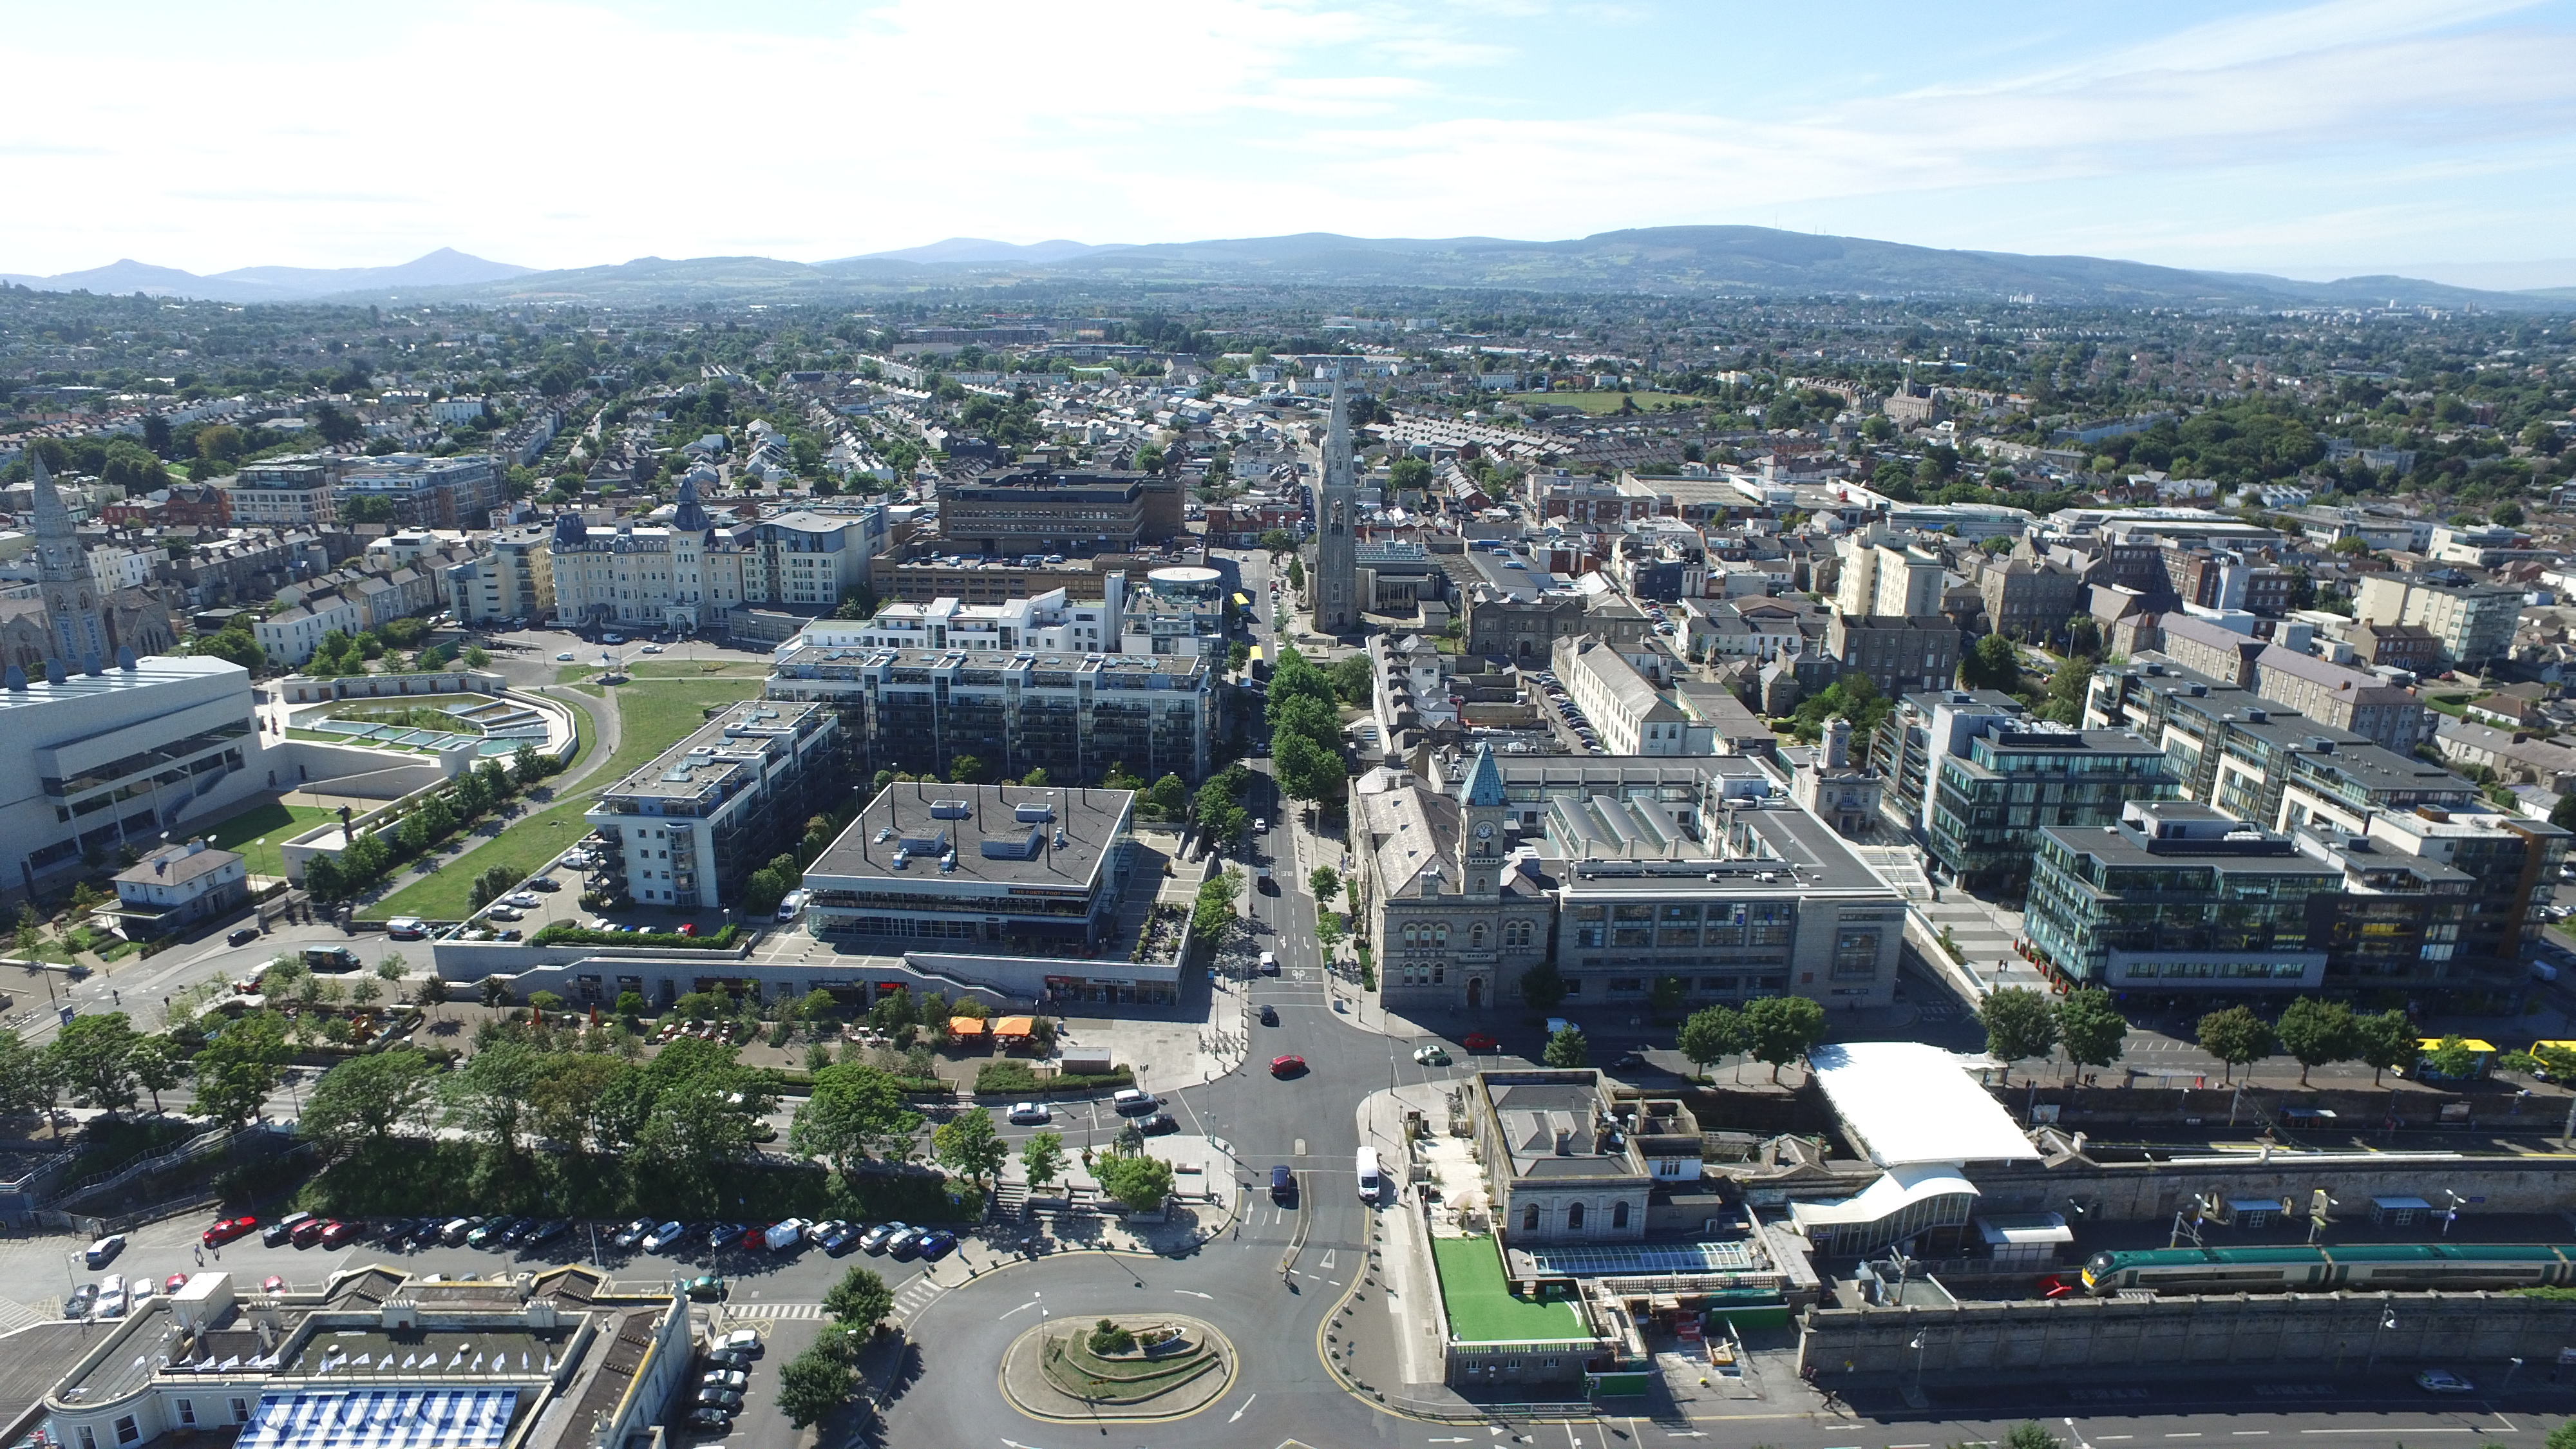 Arial view of Dun Laoghaire